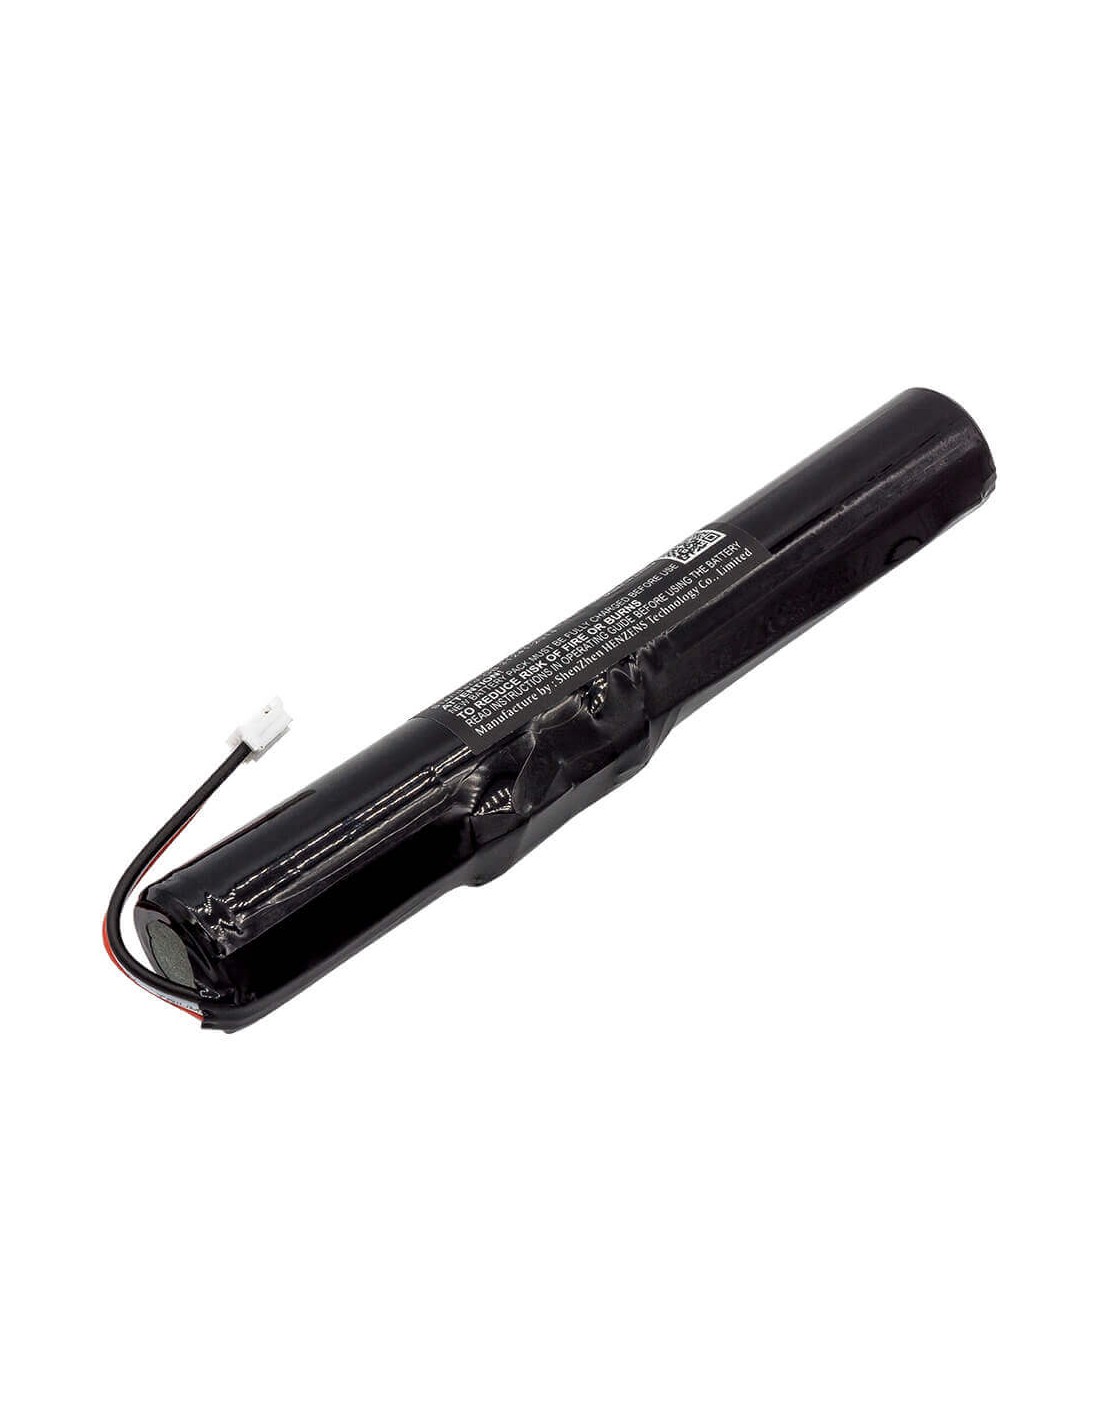 Battery for Sony, Srs-x5 7.4V, 2600mAh - 19.24Wh